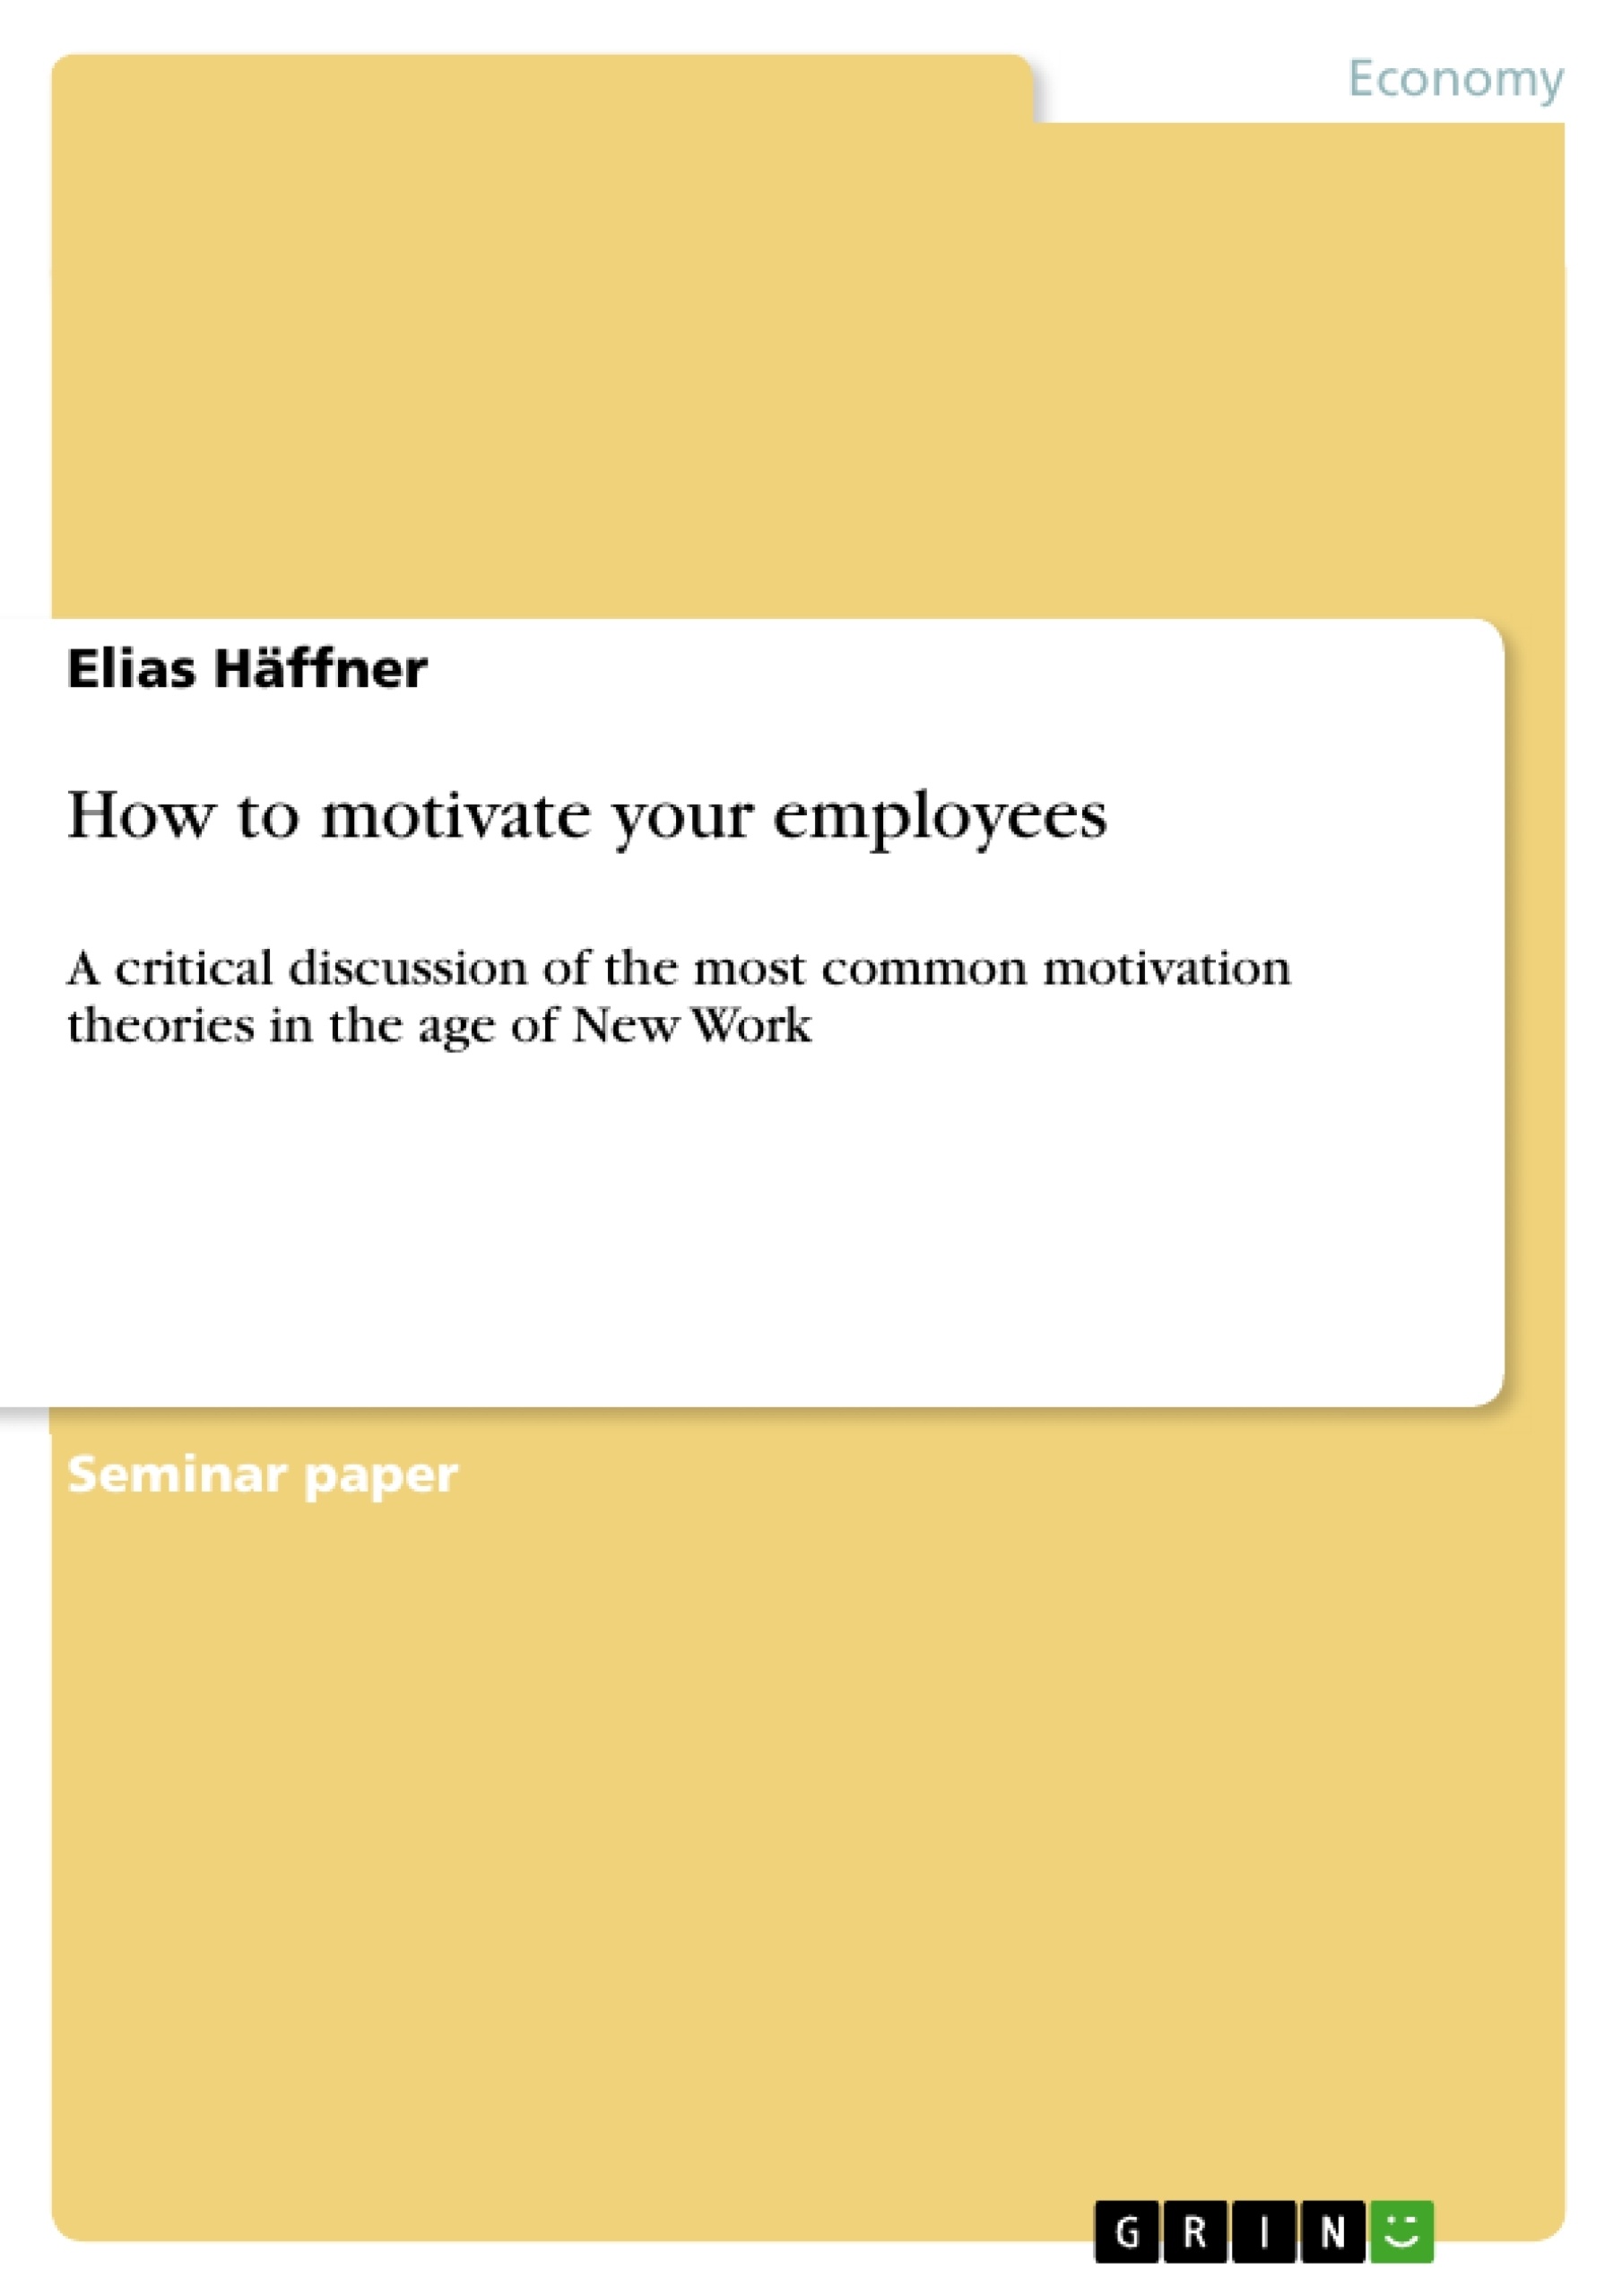 Title: How to motivate your employees